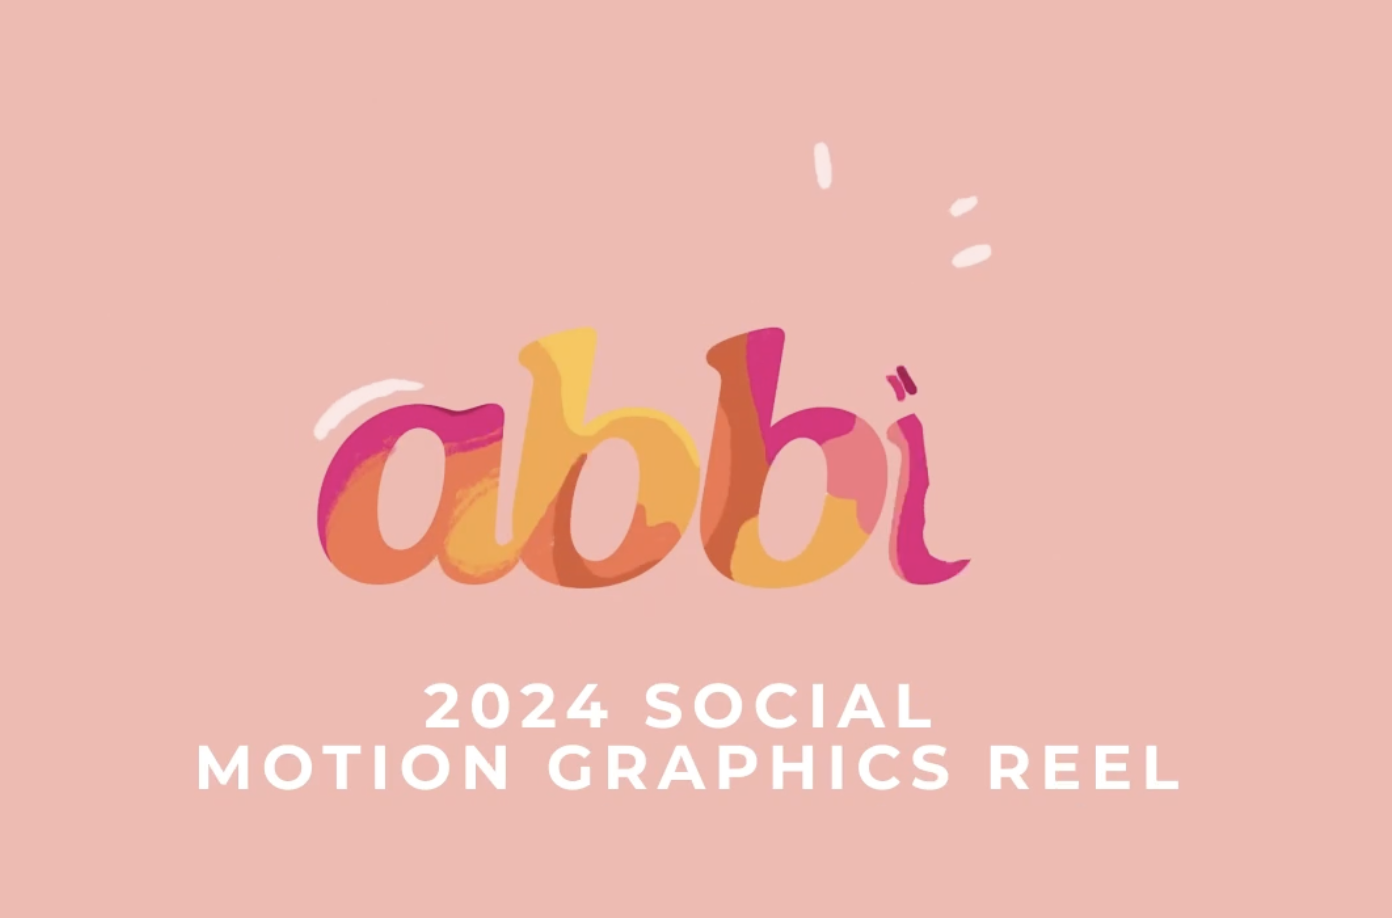 2024 Social Motion Graphics Reel by Abbigayle Warner